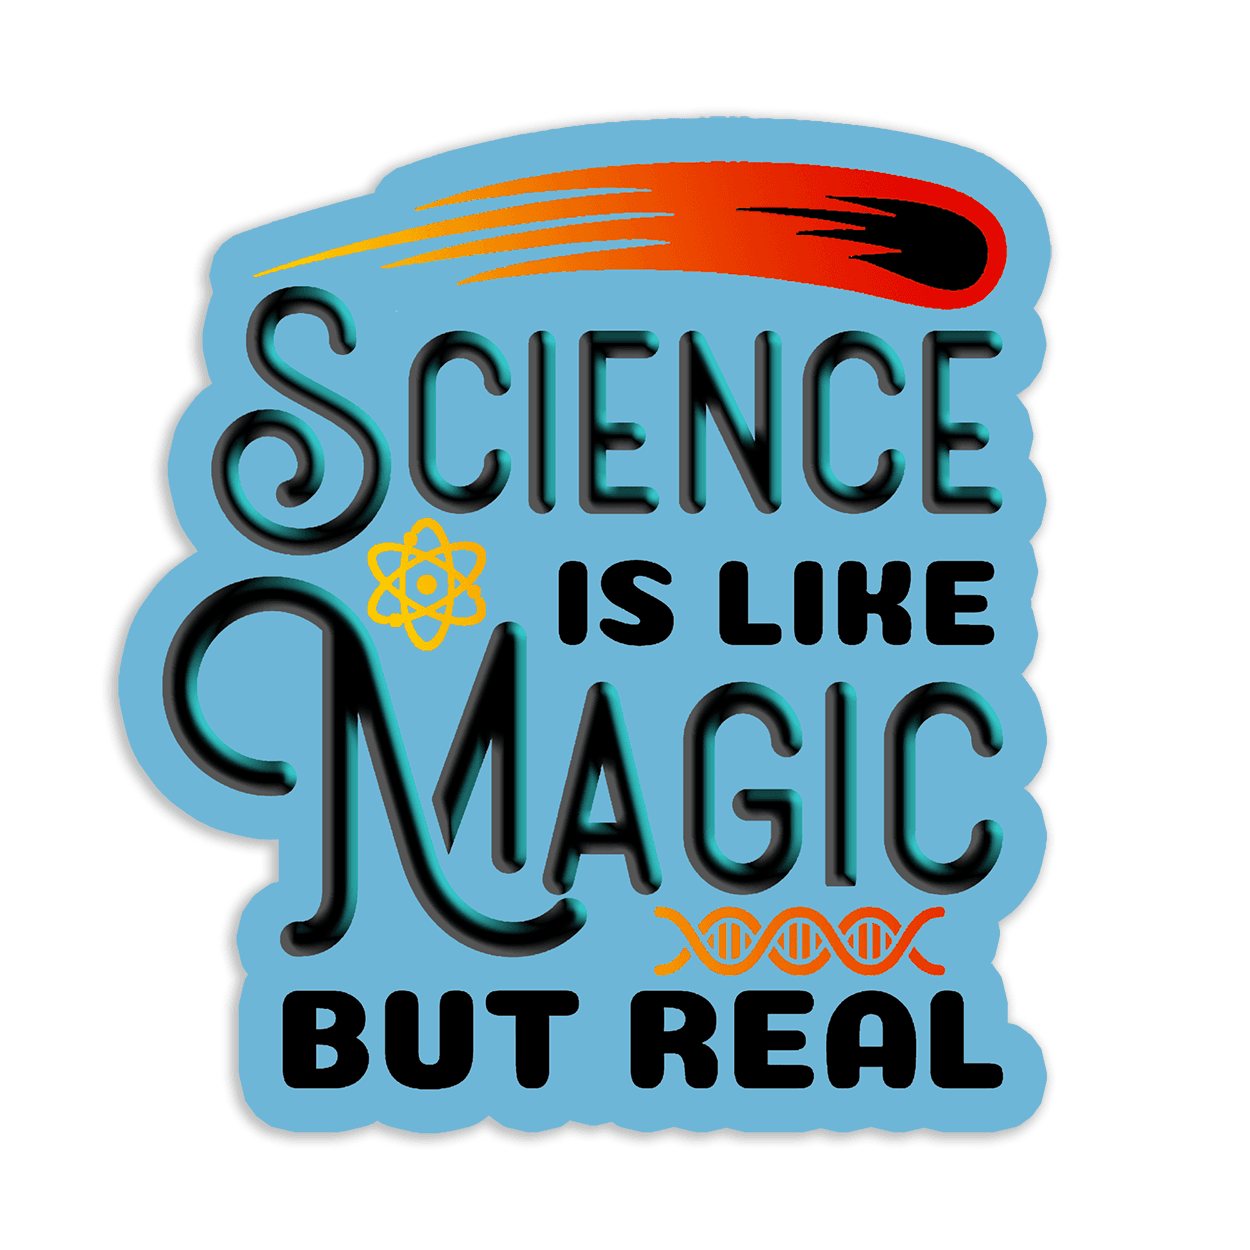 Image of a vinyl sticker that is 3 inch on its longest side with a science theme